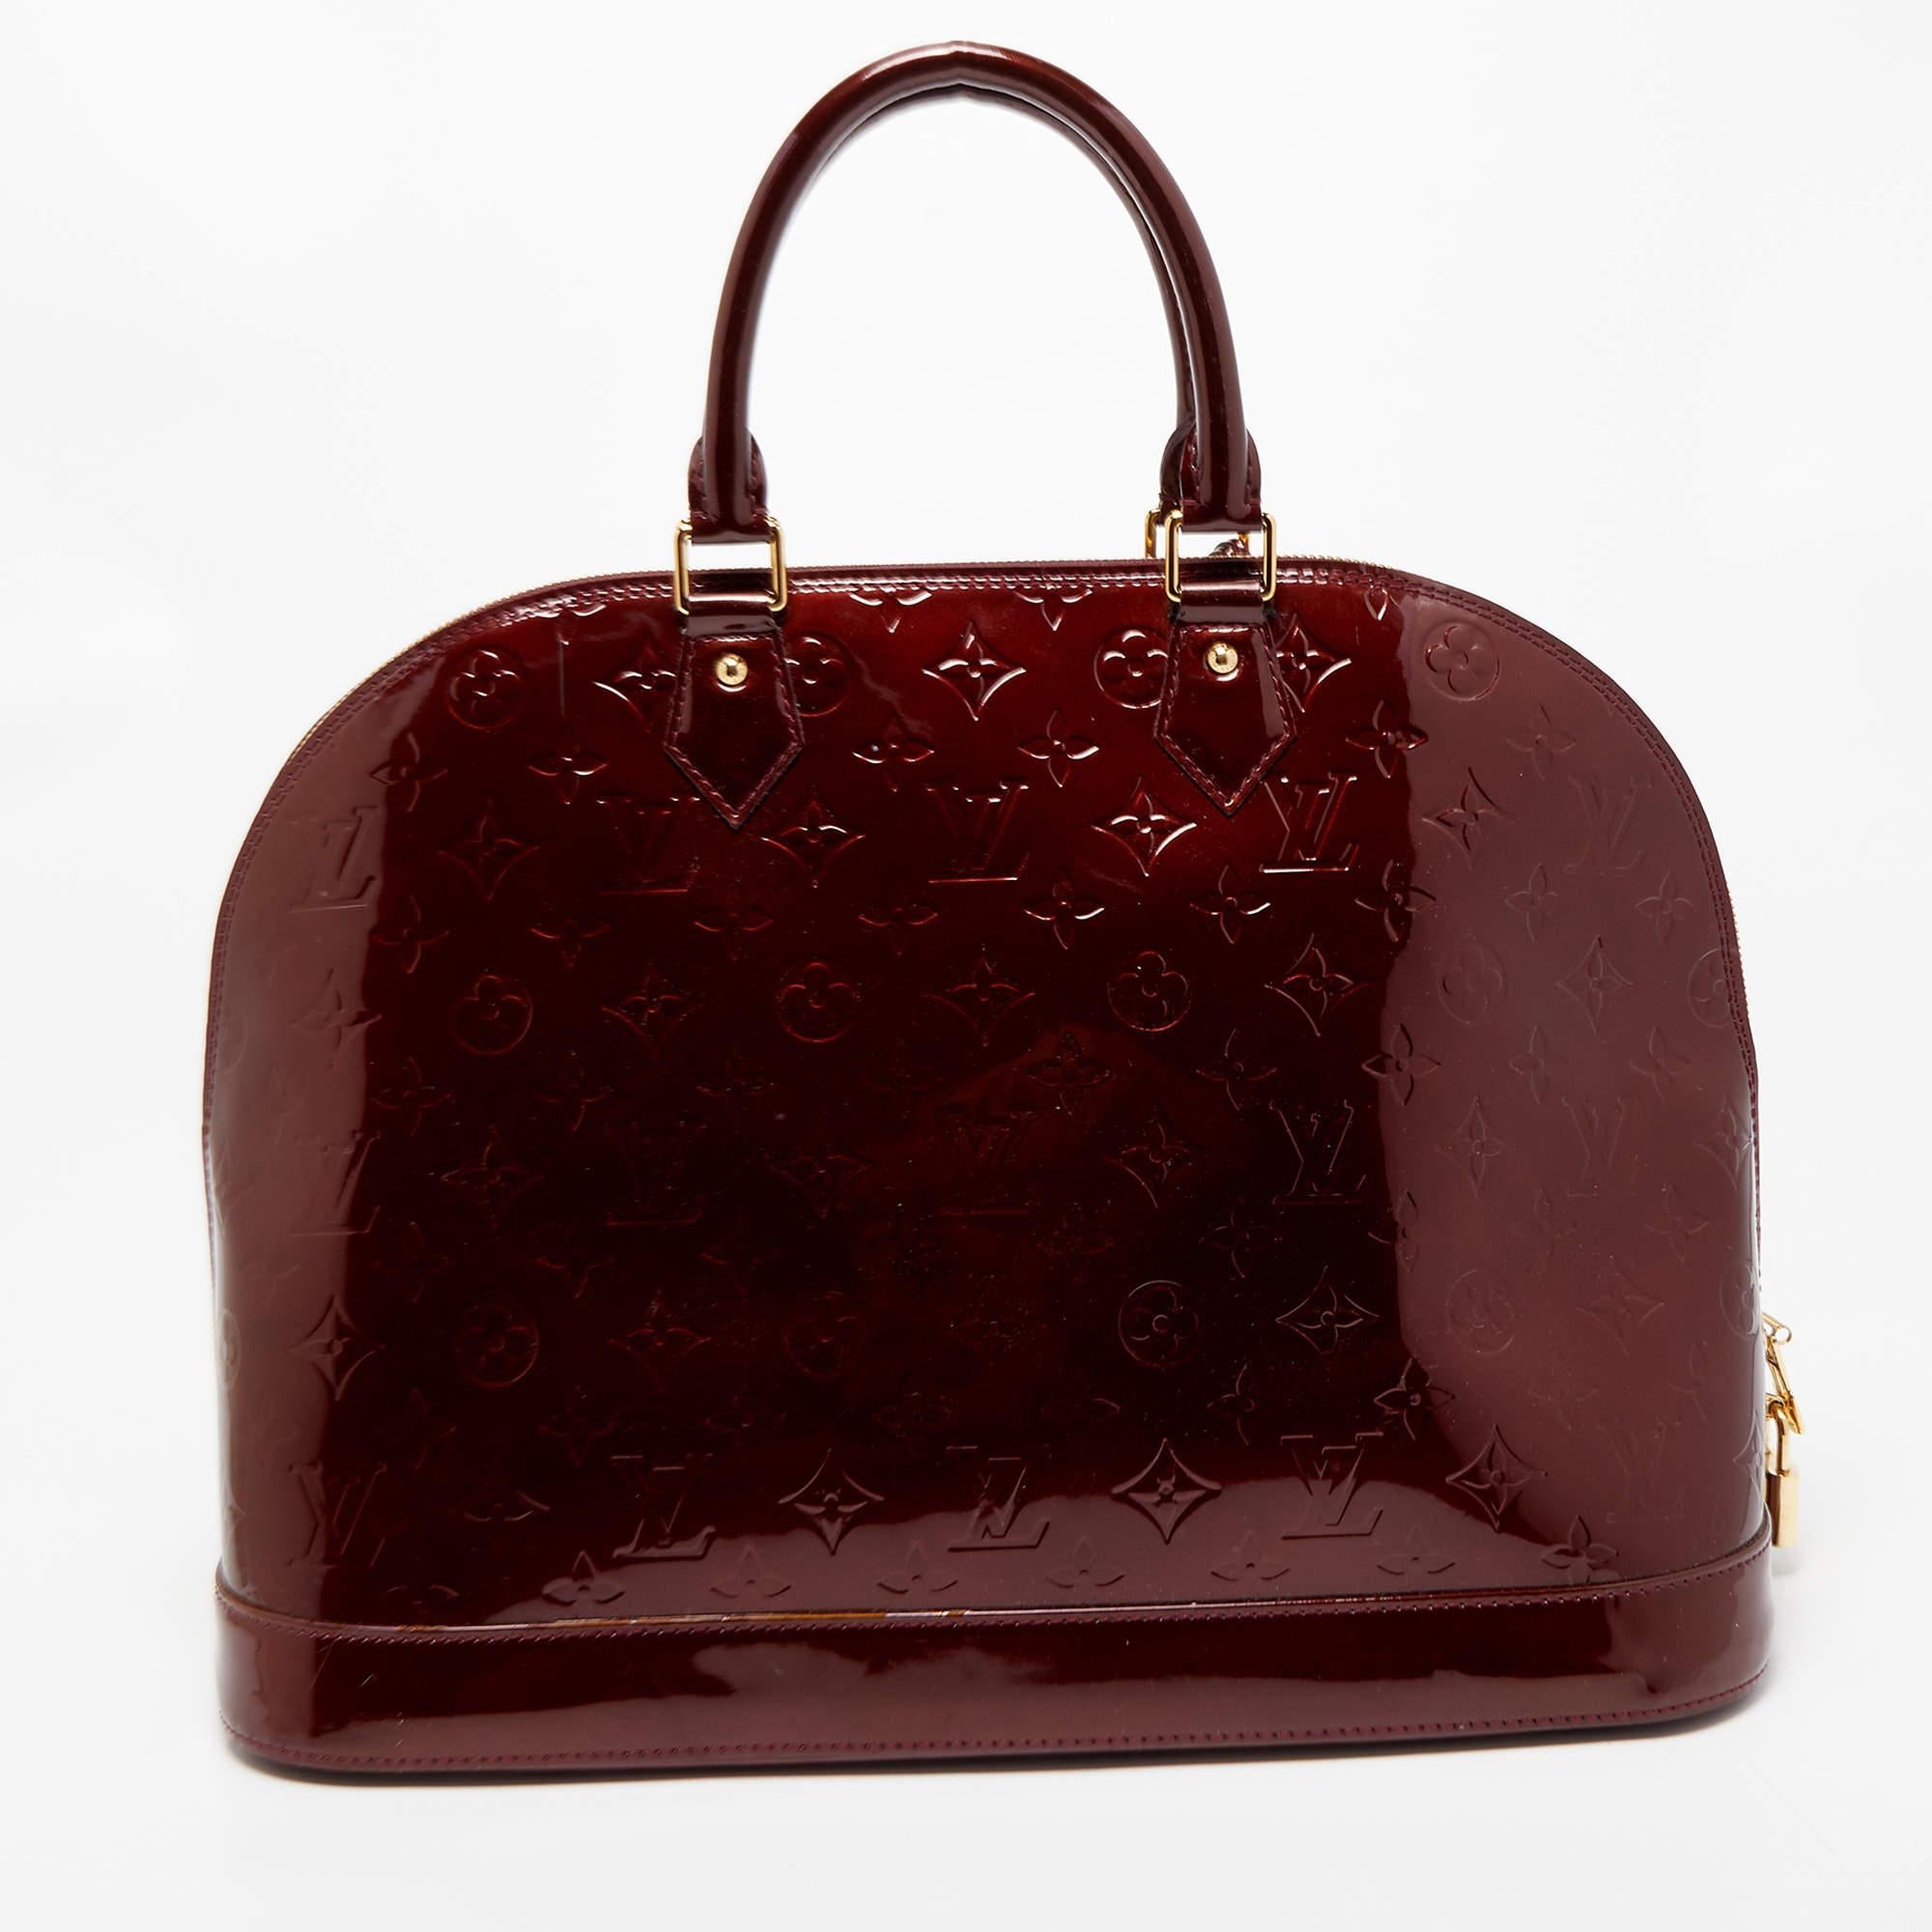 Introduced by Gaston-Louis Vuitton in 1934, the Louis Vuitton Alma is defined by elegant curves and notable features. From one of the most iconic collections of Louis Vuitton, this GM bag is imbued with exquisite craftsmanship and historic details.